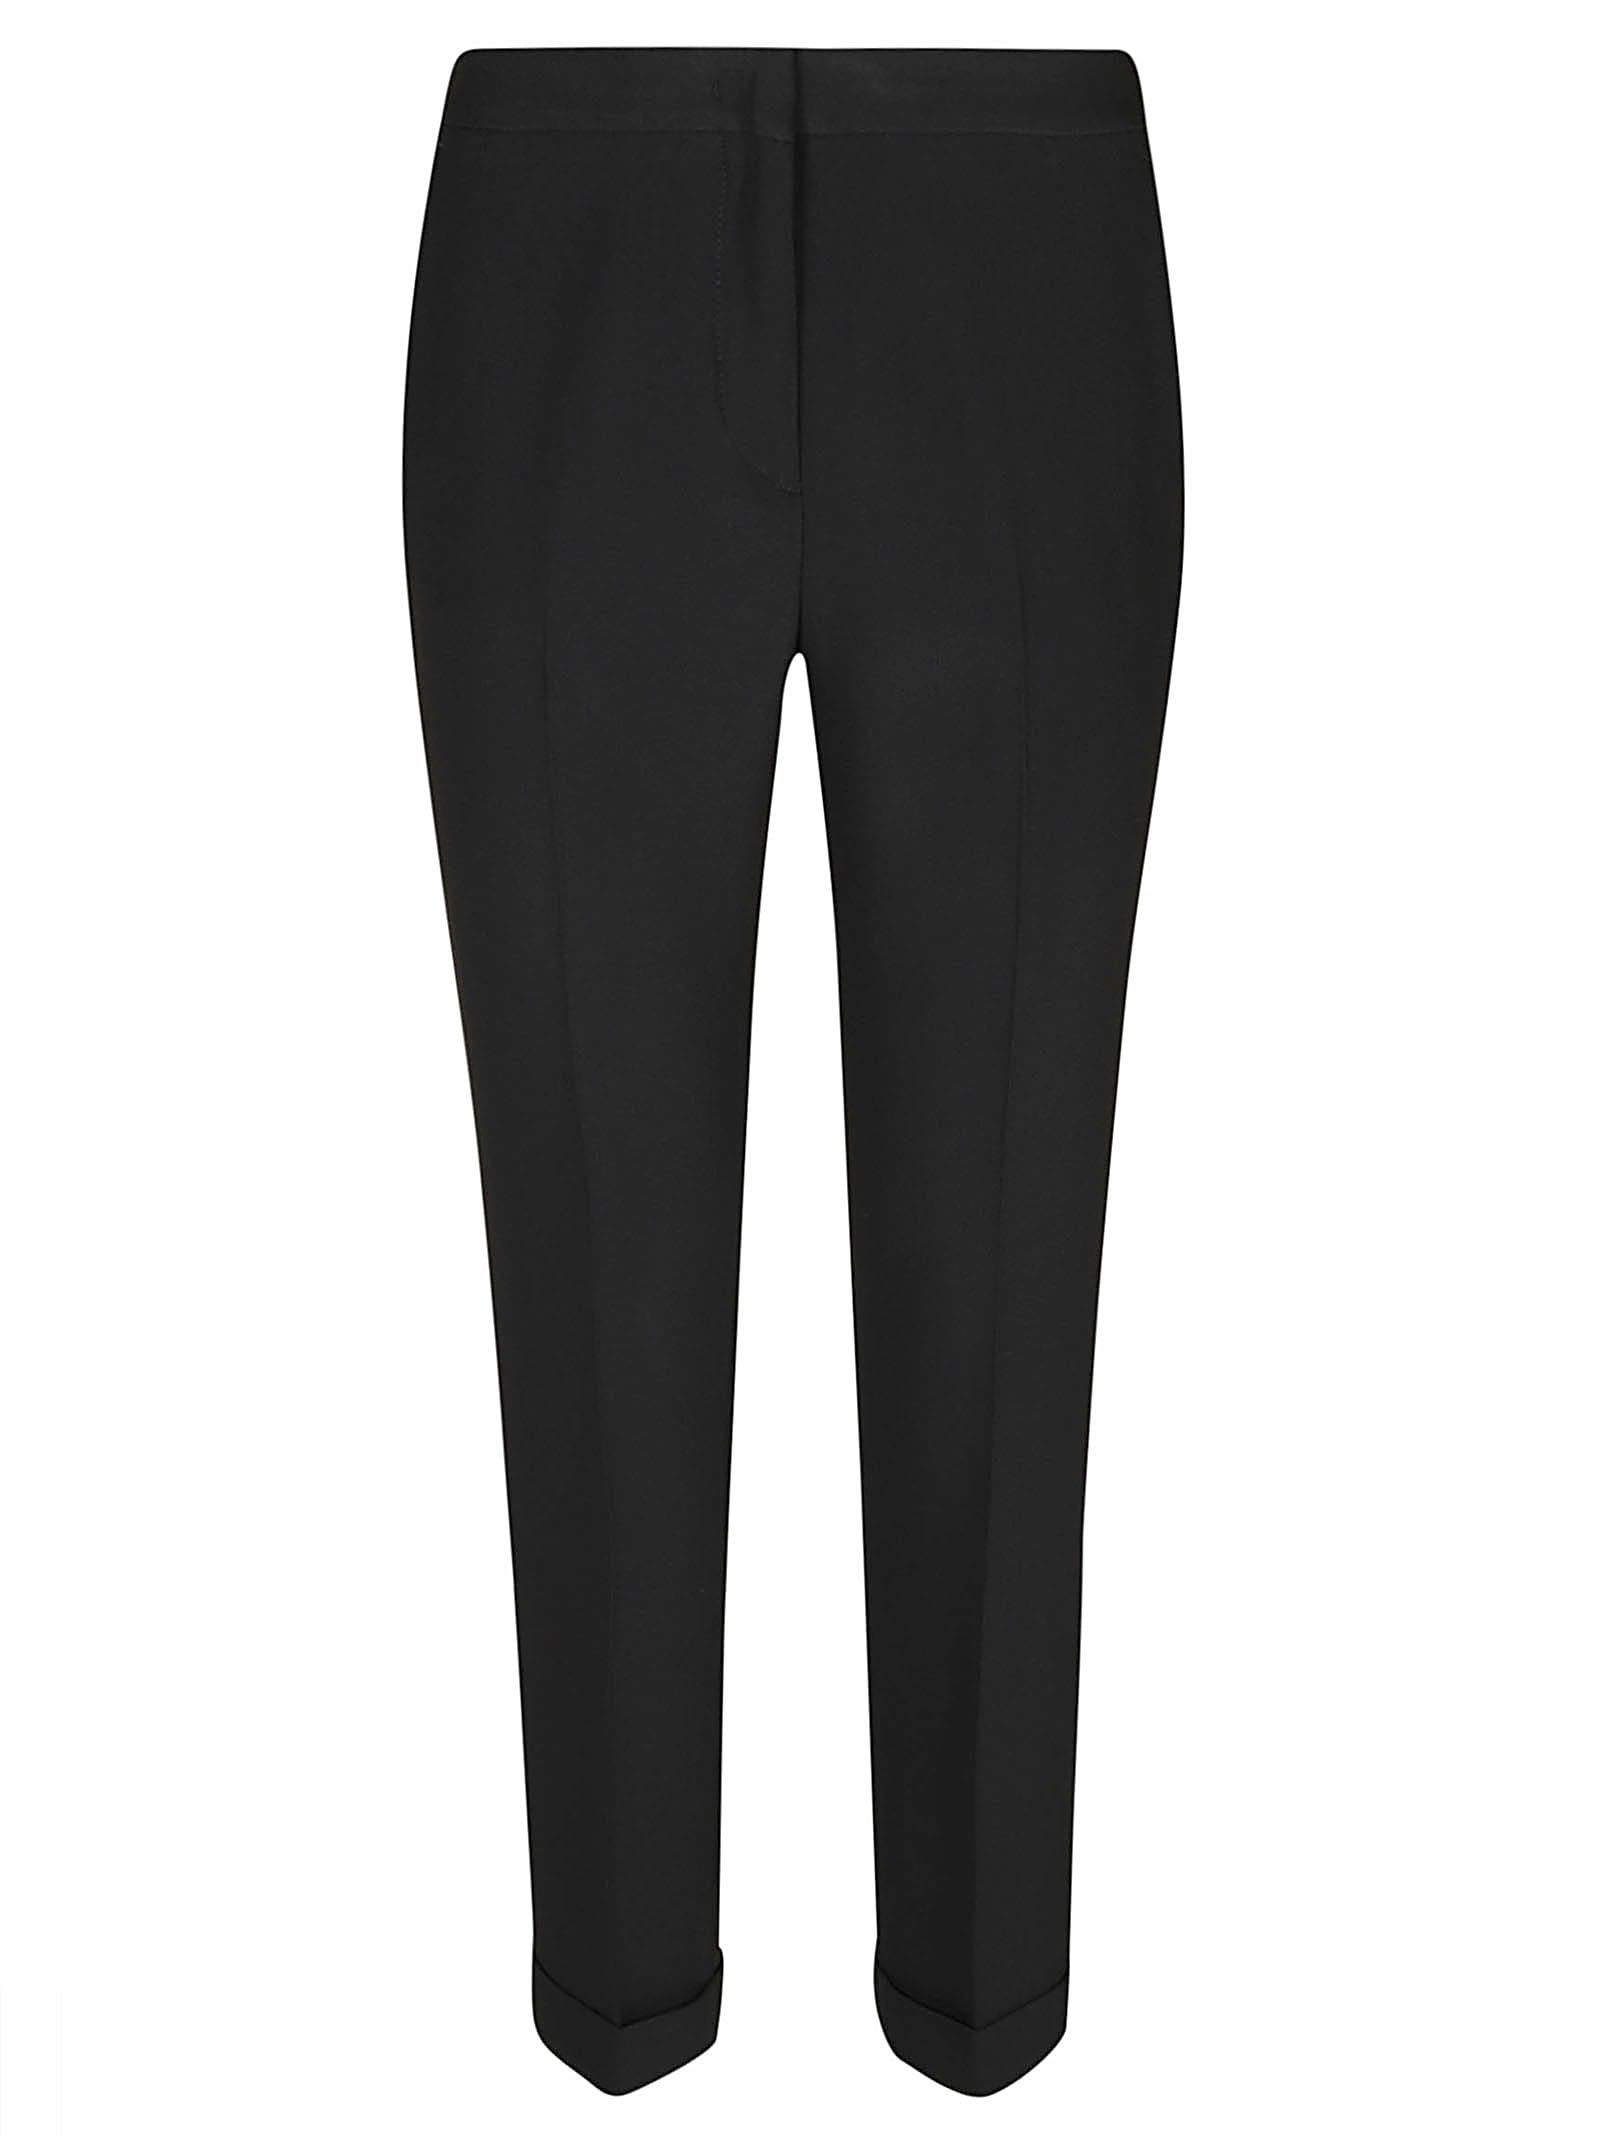 Etro Regular Fit Plain Cropped Trousers